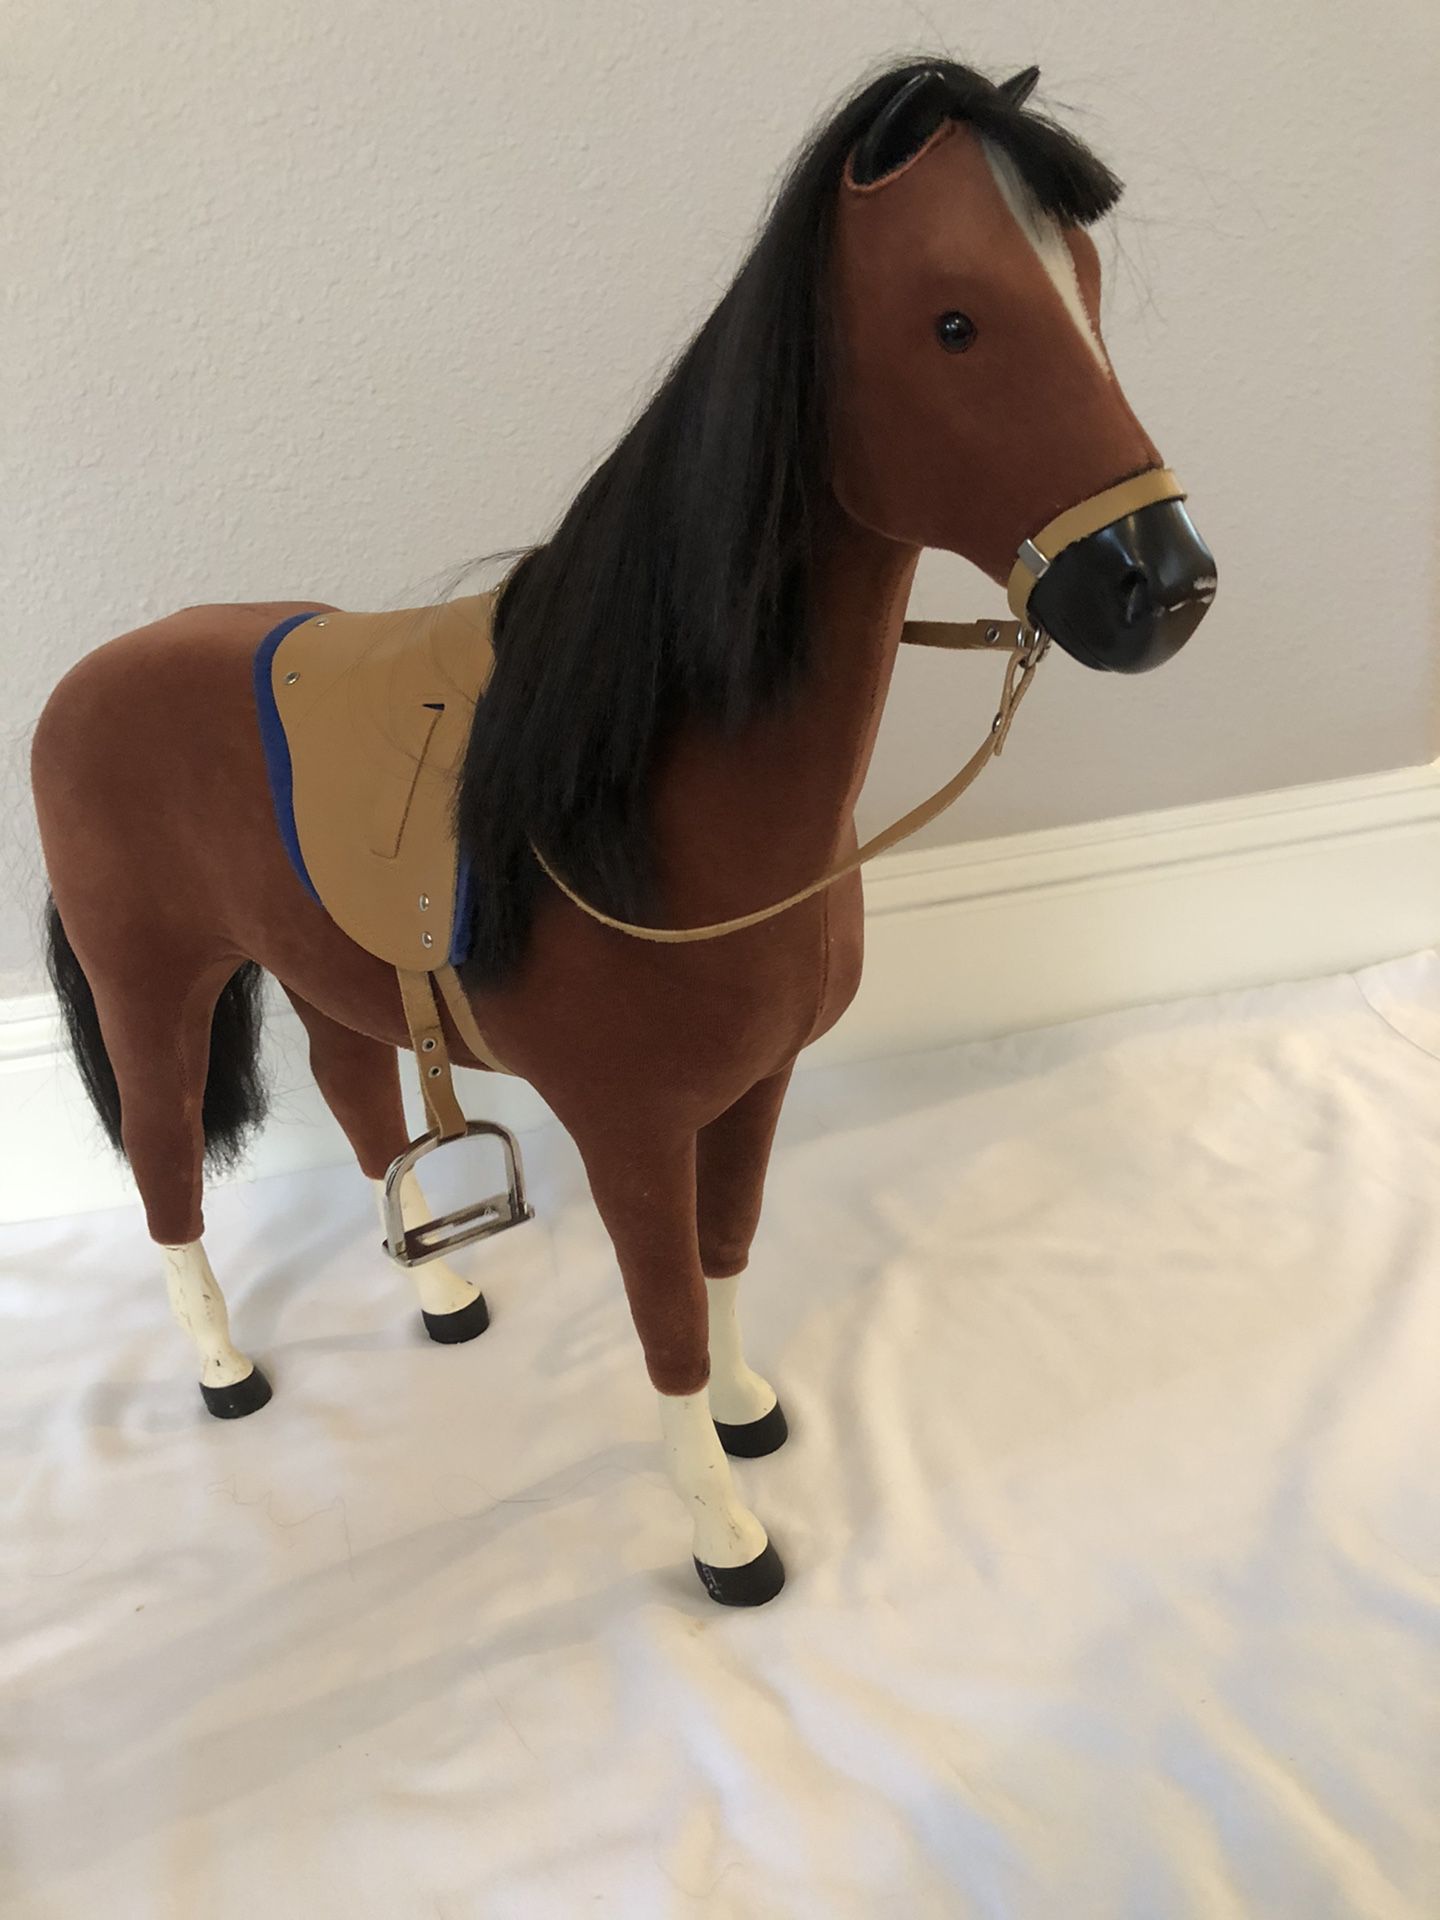 American Girl Doll horse- “Penny”